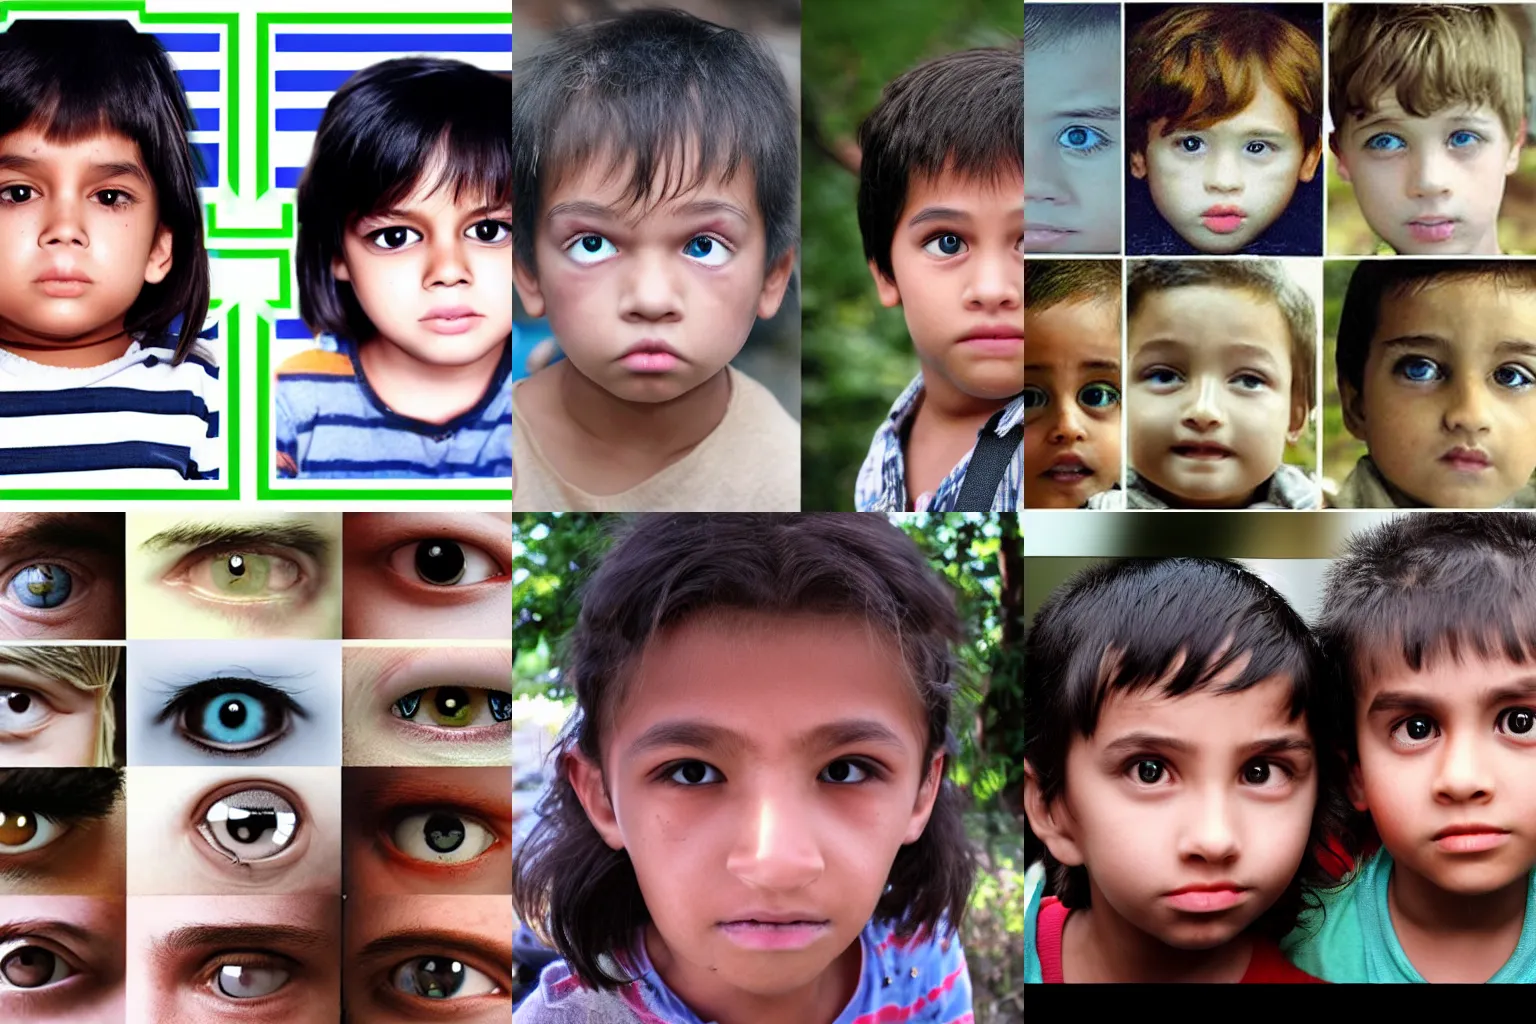 Prompt: kids eyes became very large In future due evolution as a result of using digital media day and night